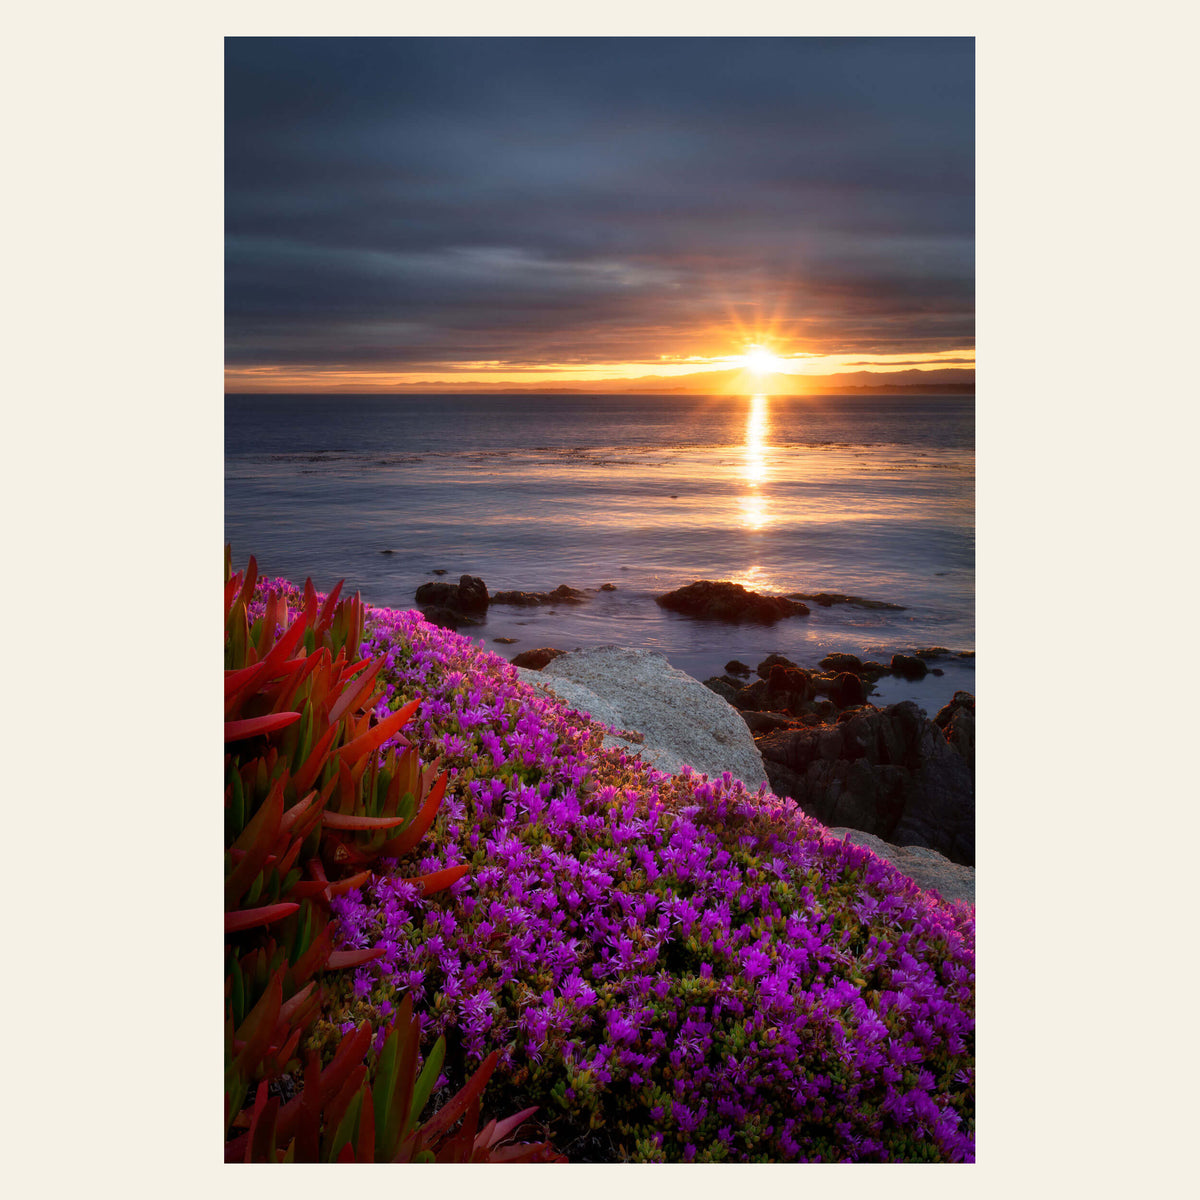 A wildflower picture of a sunrise in Pacific Grove, California.